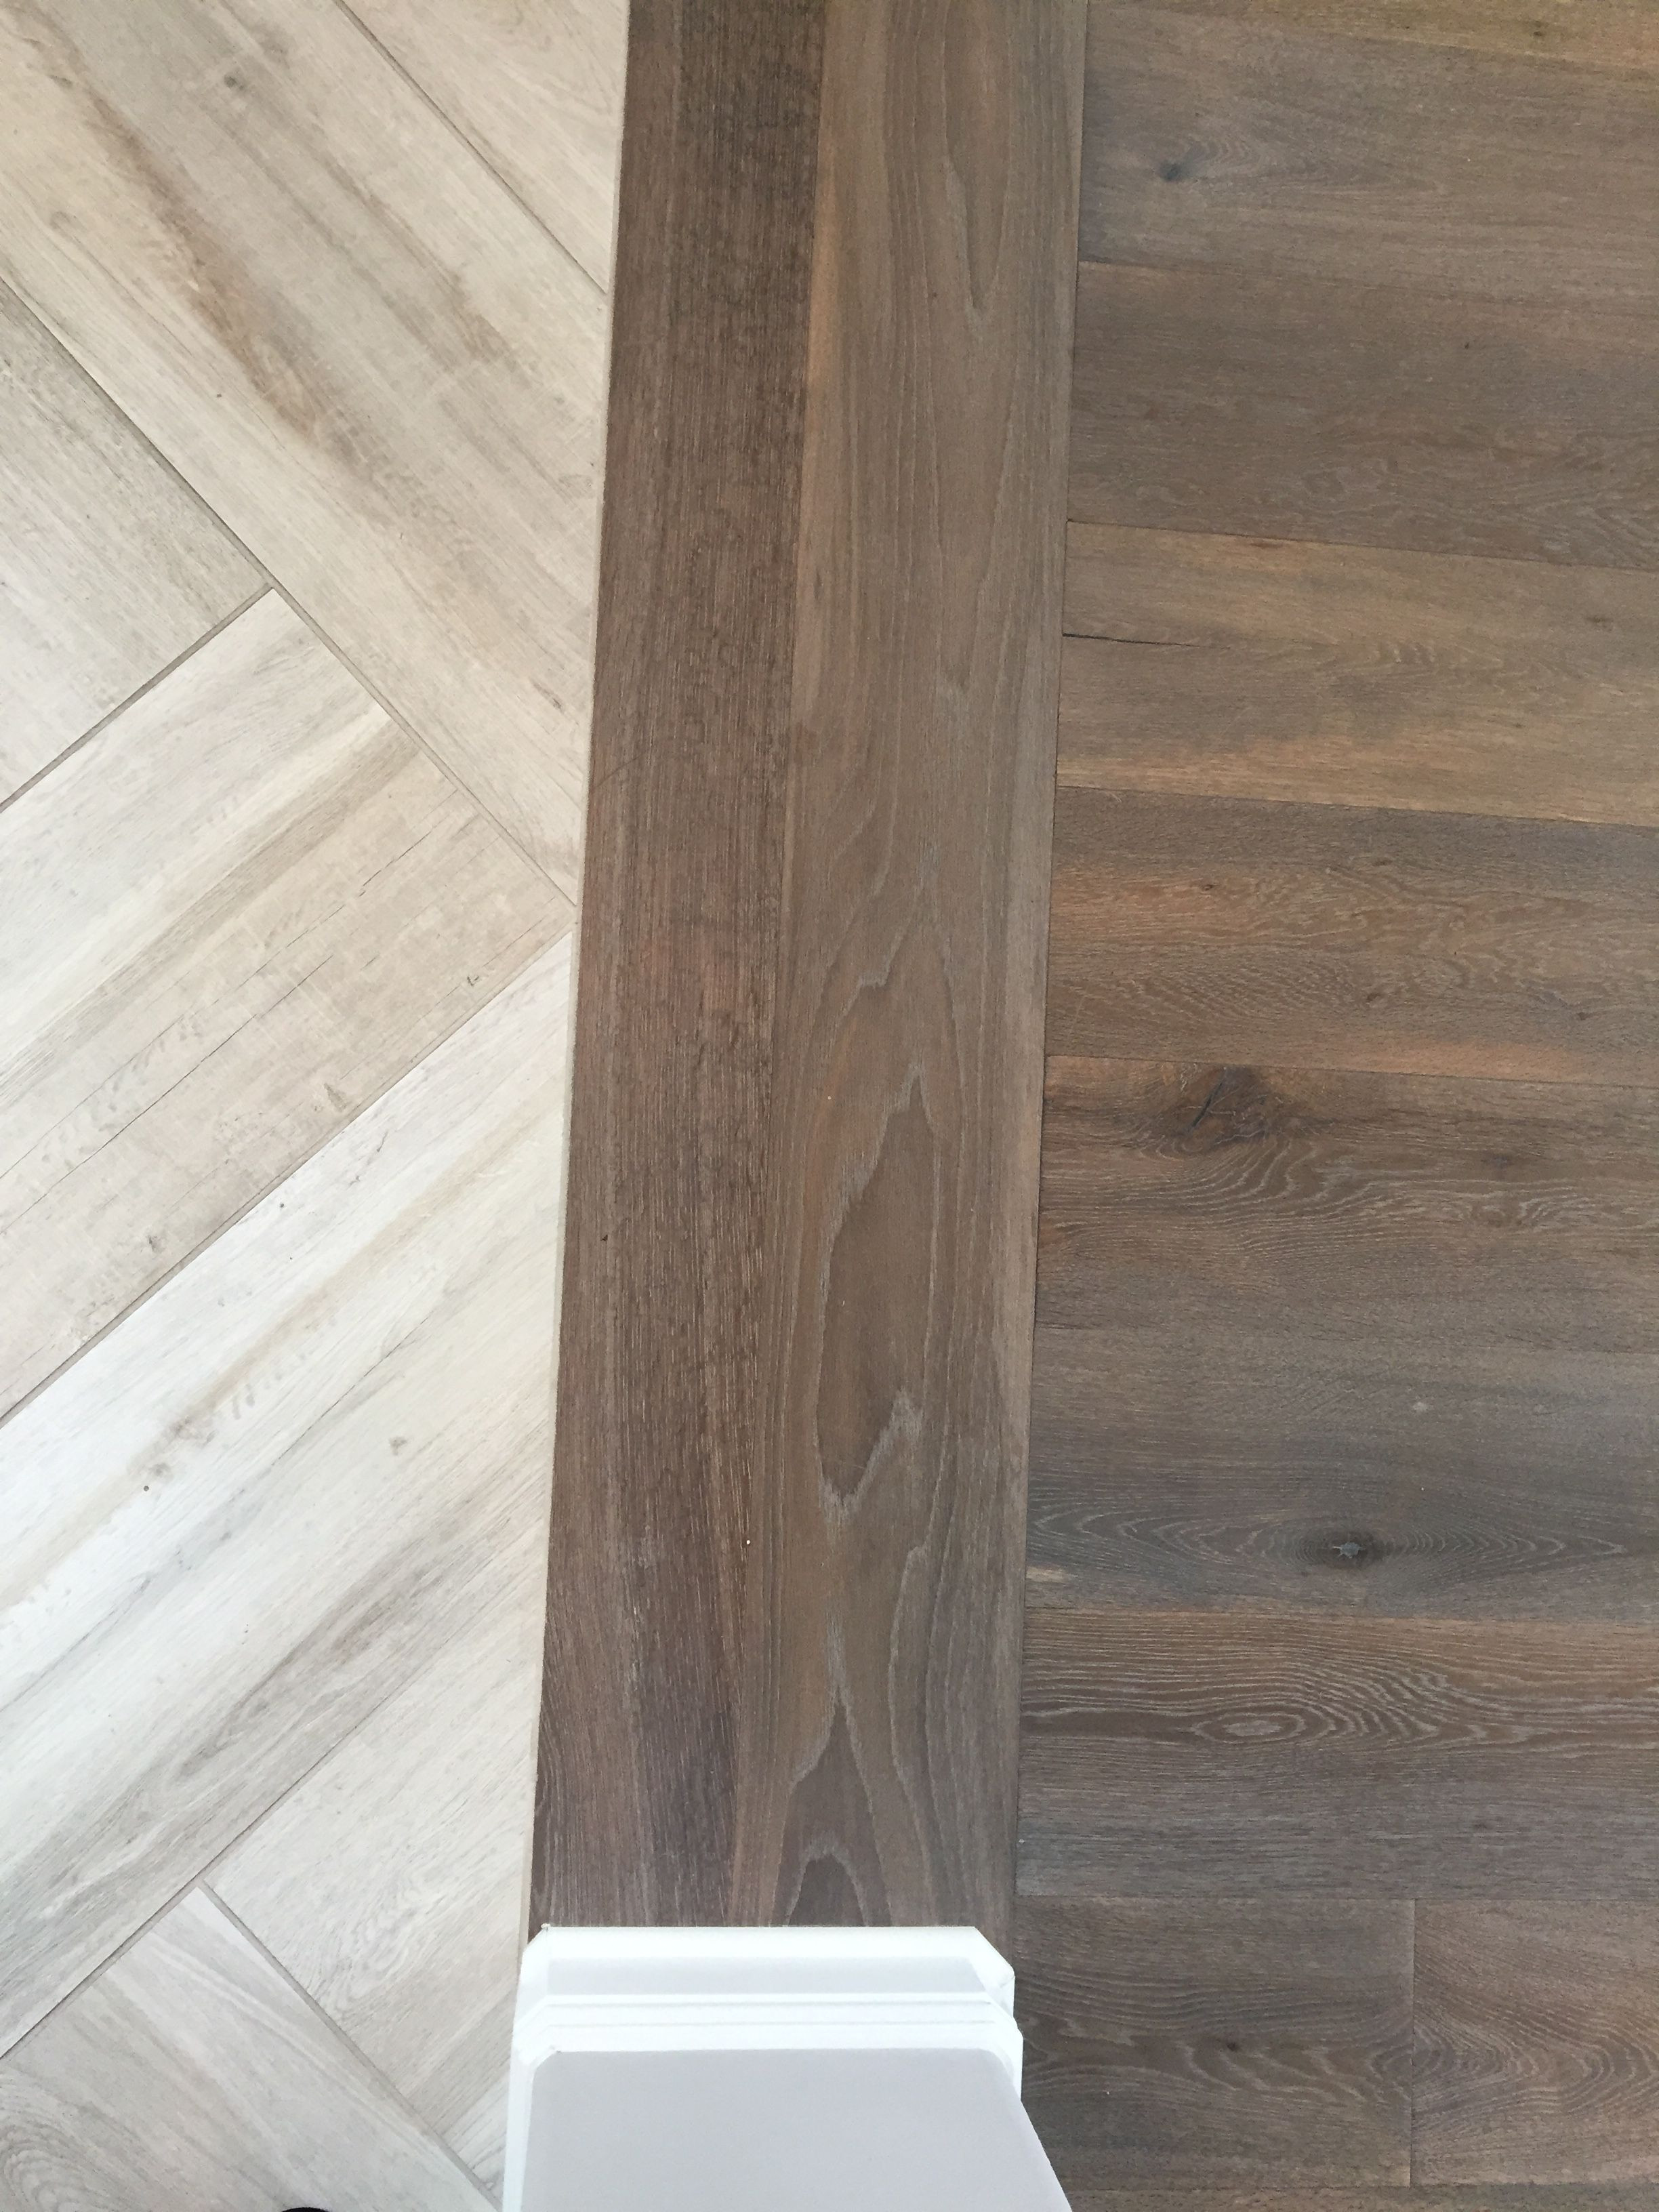 15 Popular How to Hardwood Floor Stairs 2024 free download how to hardwood floor stairs of floor transition laminate to herringbone tile pattern kitchen intended for lighter color wood though floor transition laminate to herringbone tile pattern